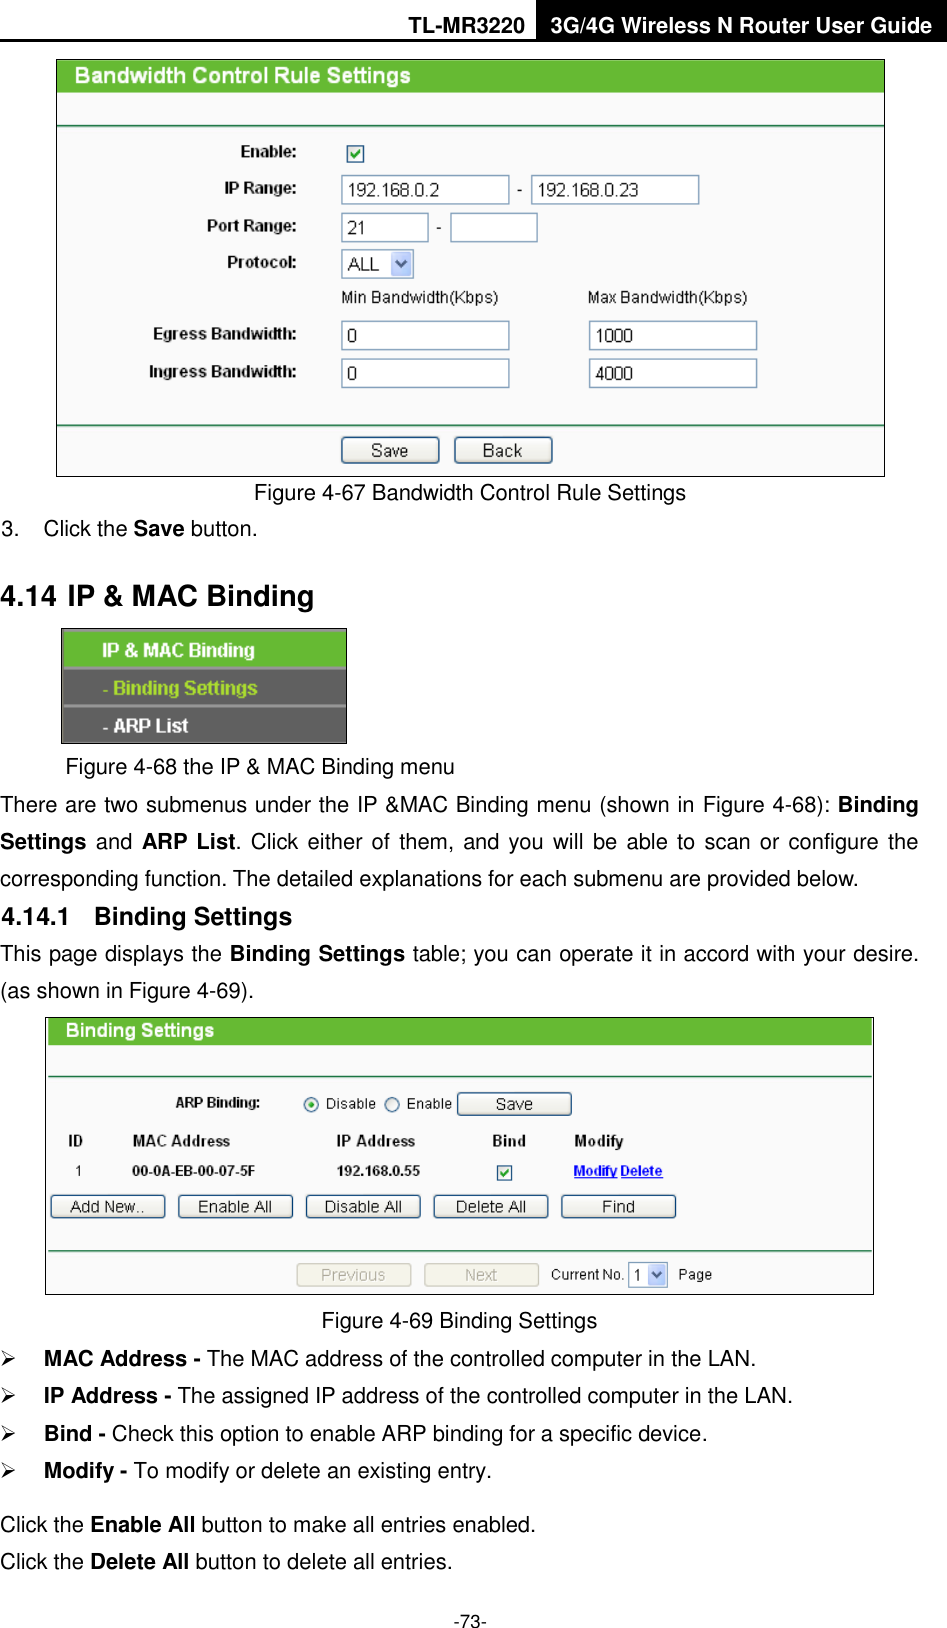 TL-MR3220 3G/4G Wireless N Router User Guide  -73-  Figure 4-67 Bandwidth Control Rule Settings 3.  Click the Save button. 4.14 IP &amp; MAC Binding  Figure 4-68 the IP &amp; MAC Binding menu There are two submenus under the IP &amp;MAC Binding menu (shown in Figure 4-68): Binding Settings and ARP  List. Click either of them, and  you will be able to scan  or configure the corresponding function. The detailed explanations for each submenu are provided below. 4.14.1  Binding Settings This page displays the Binding Settings table; you can operate it in accord with your desire. (as shown in Figure 4-69).    Figure 4-69 Binding Settings  MAC Address - The MAC address of the controlled computer in the LAN.    IP Address - The assigned IP address of the controlled computer in the LAN.    Bind - Check this option to enable ARP binding for a specific device.    Modify - To modify or delete an existing entry.   Click the Enable All button to make all entries enabled. Click the Delete All button to delete all entries. 